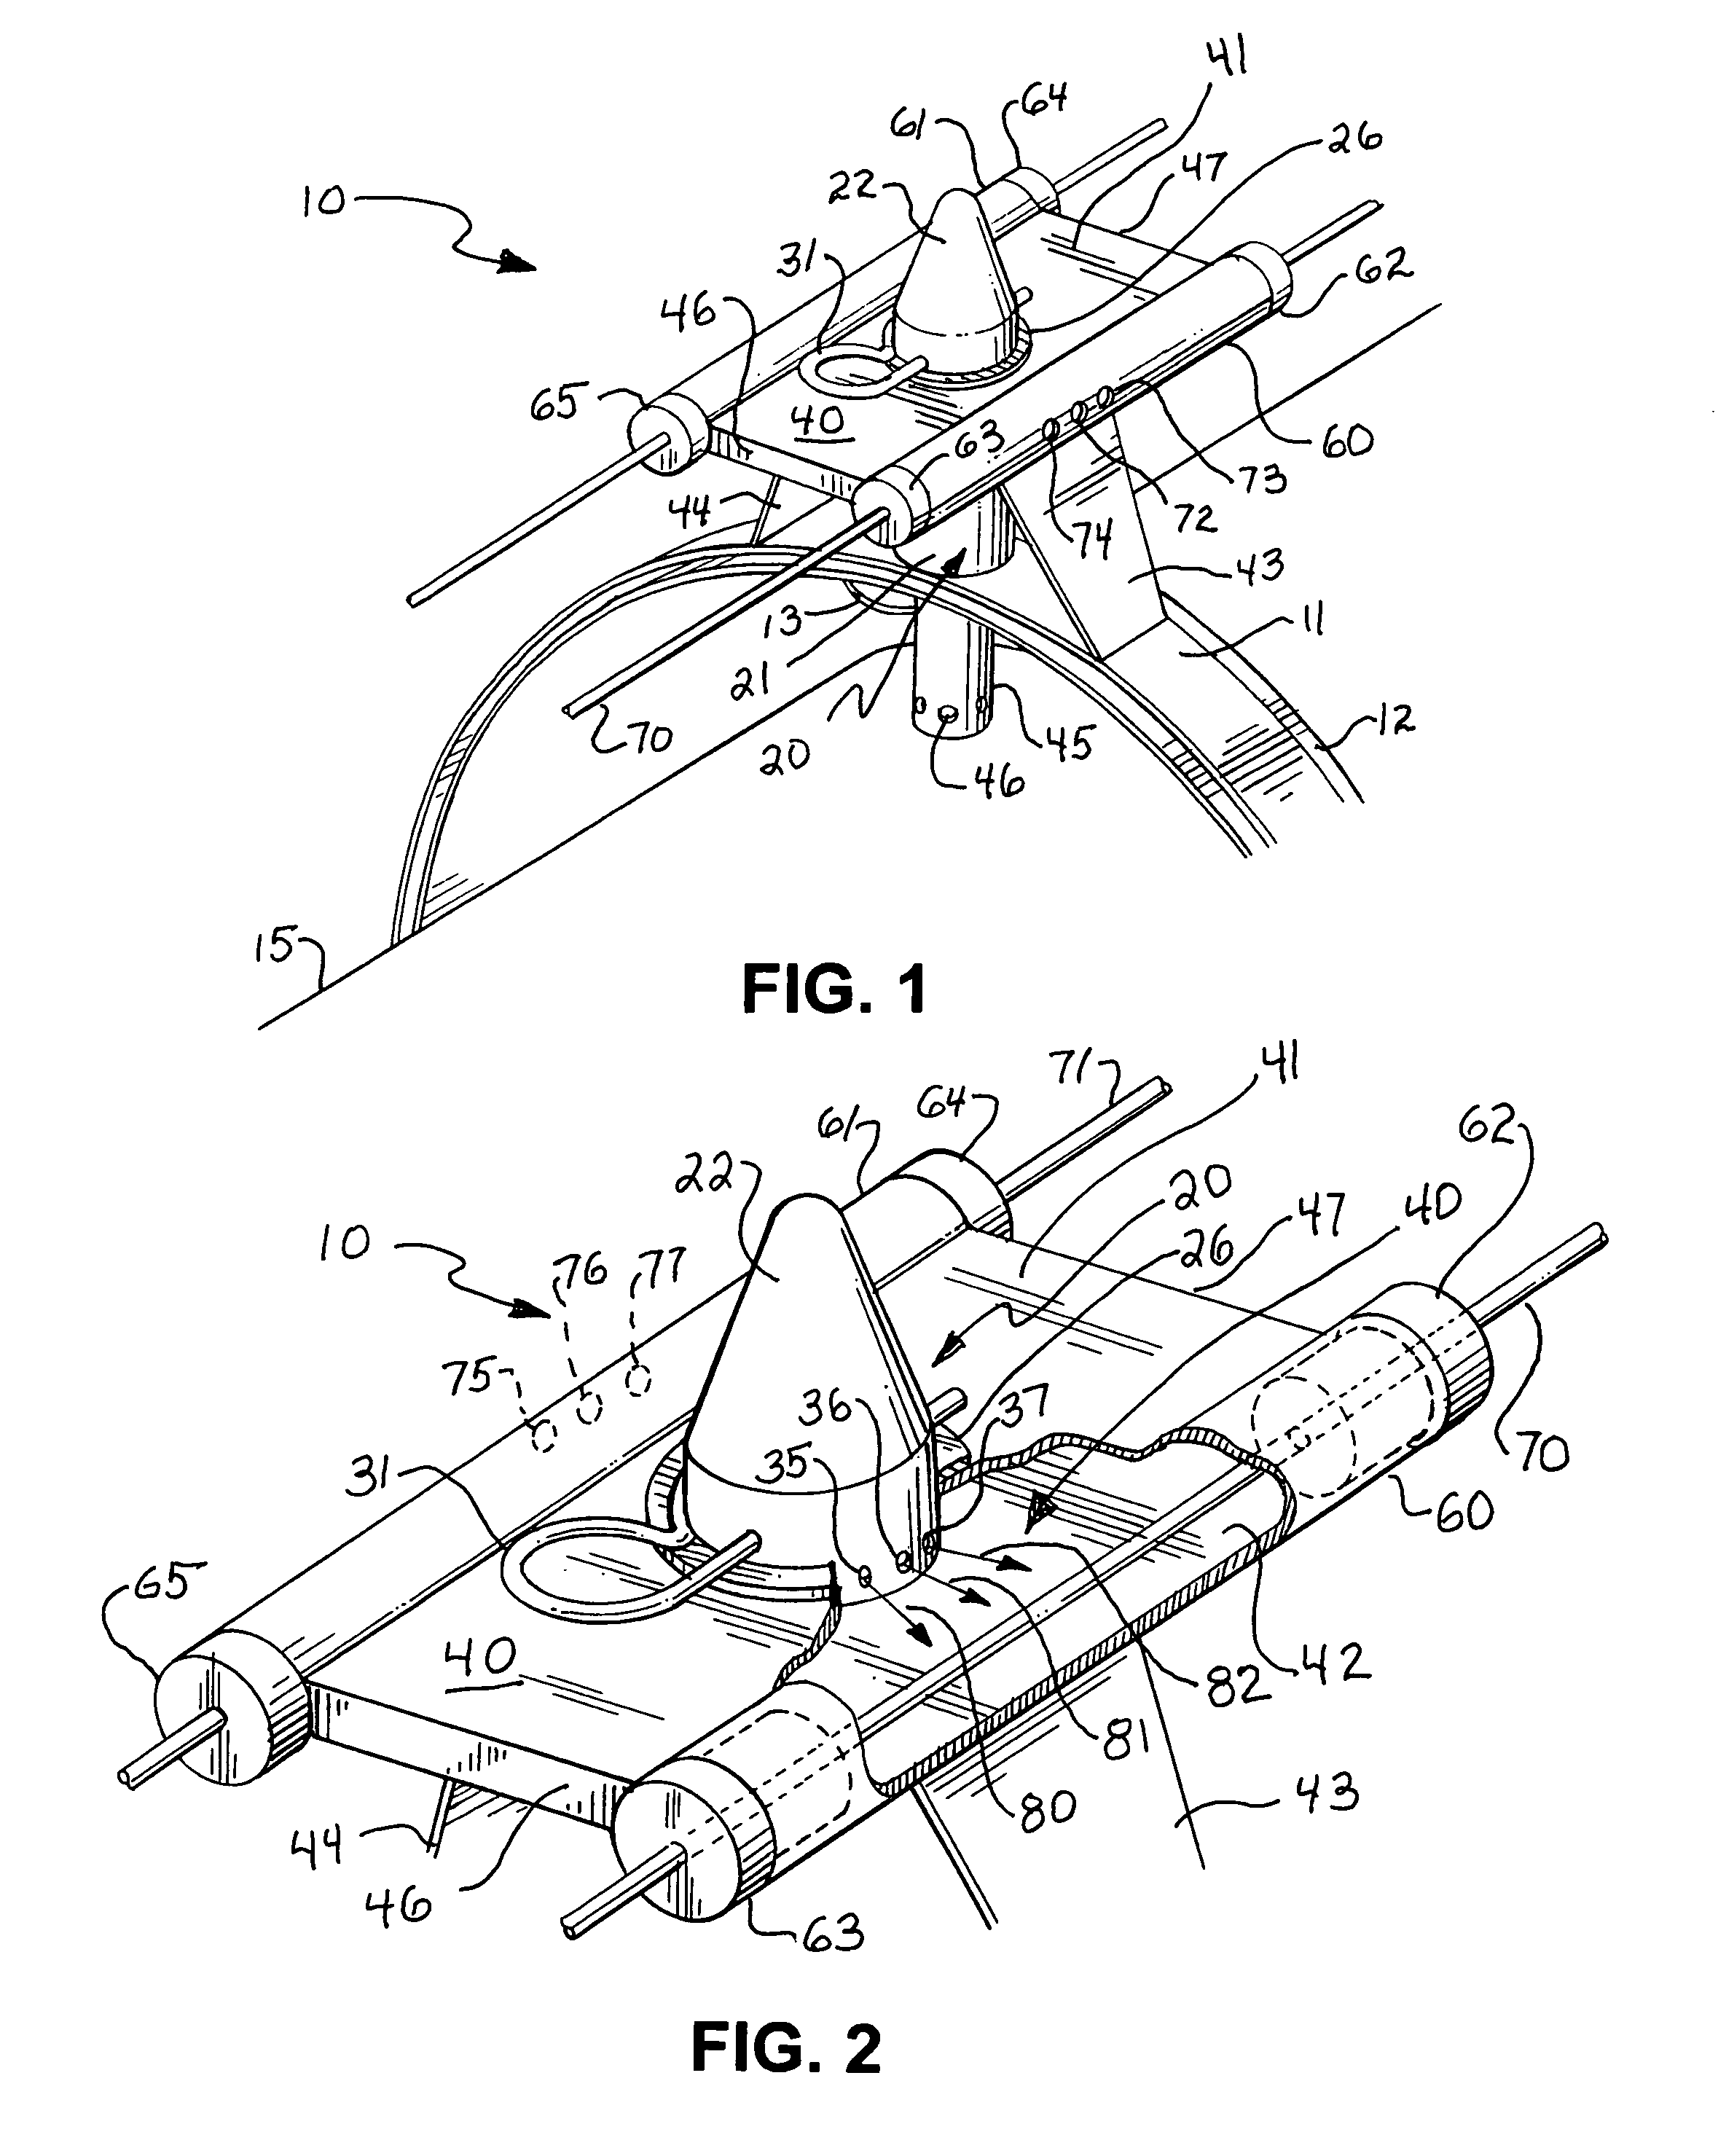 Leak detection apparatus for aircraft bleed air systems